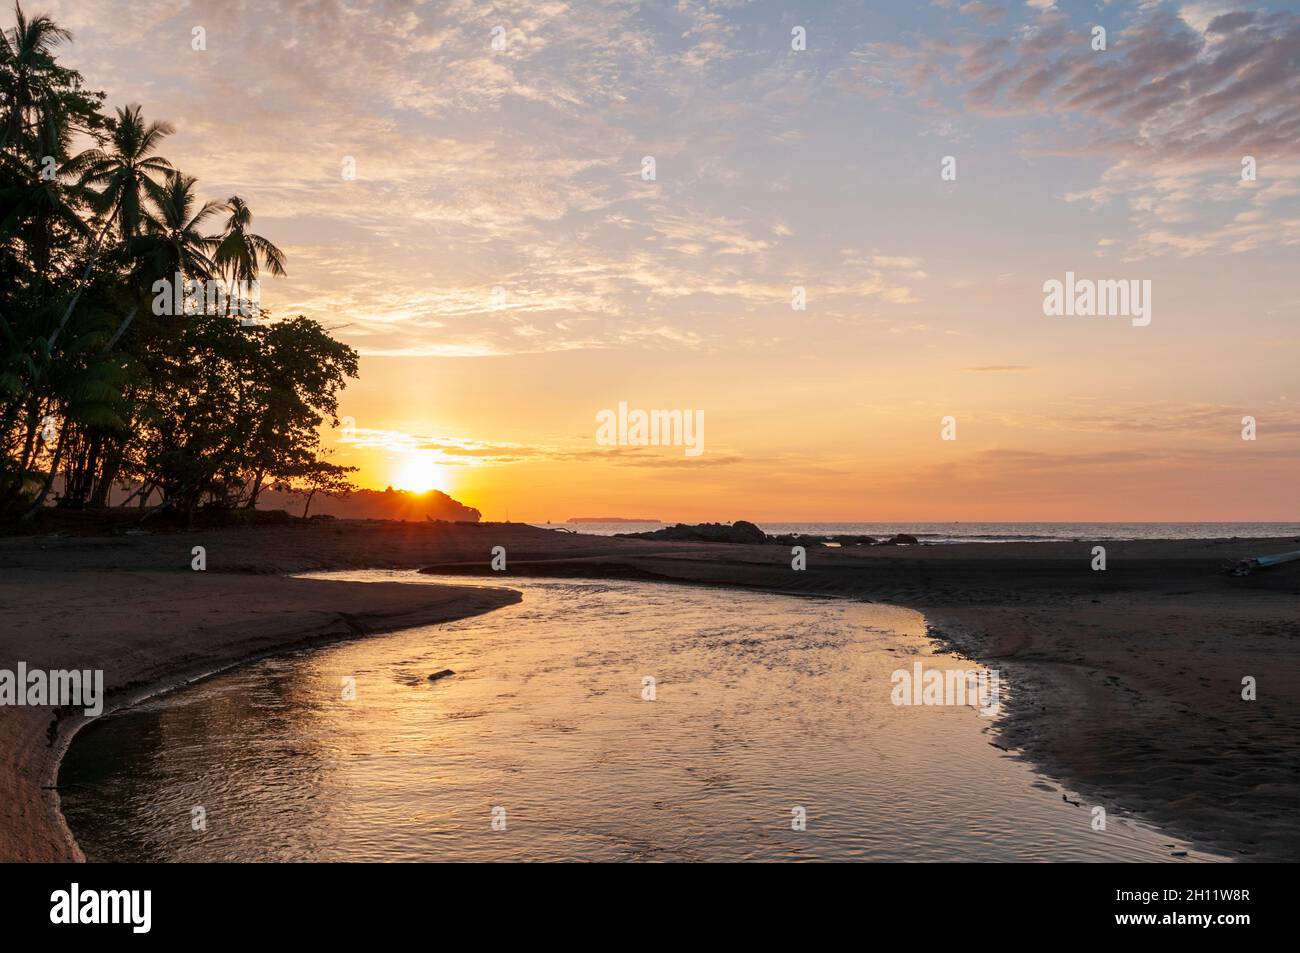 Sunset and silhouetted palm trees on a sandy beach. Drake Bay, Osa Peninsula, Costa Rica. Stock Photo